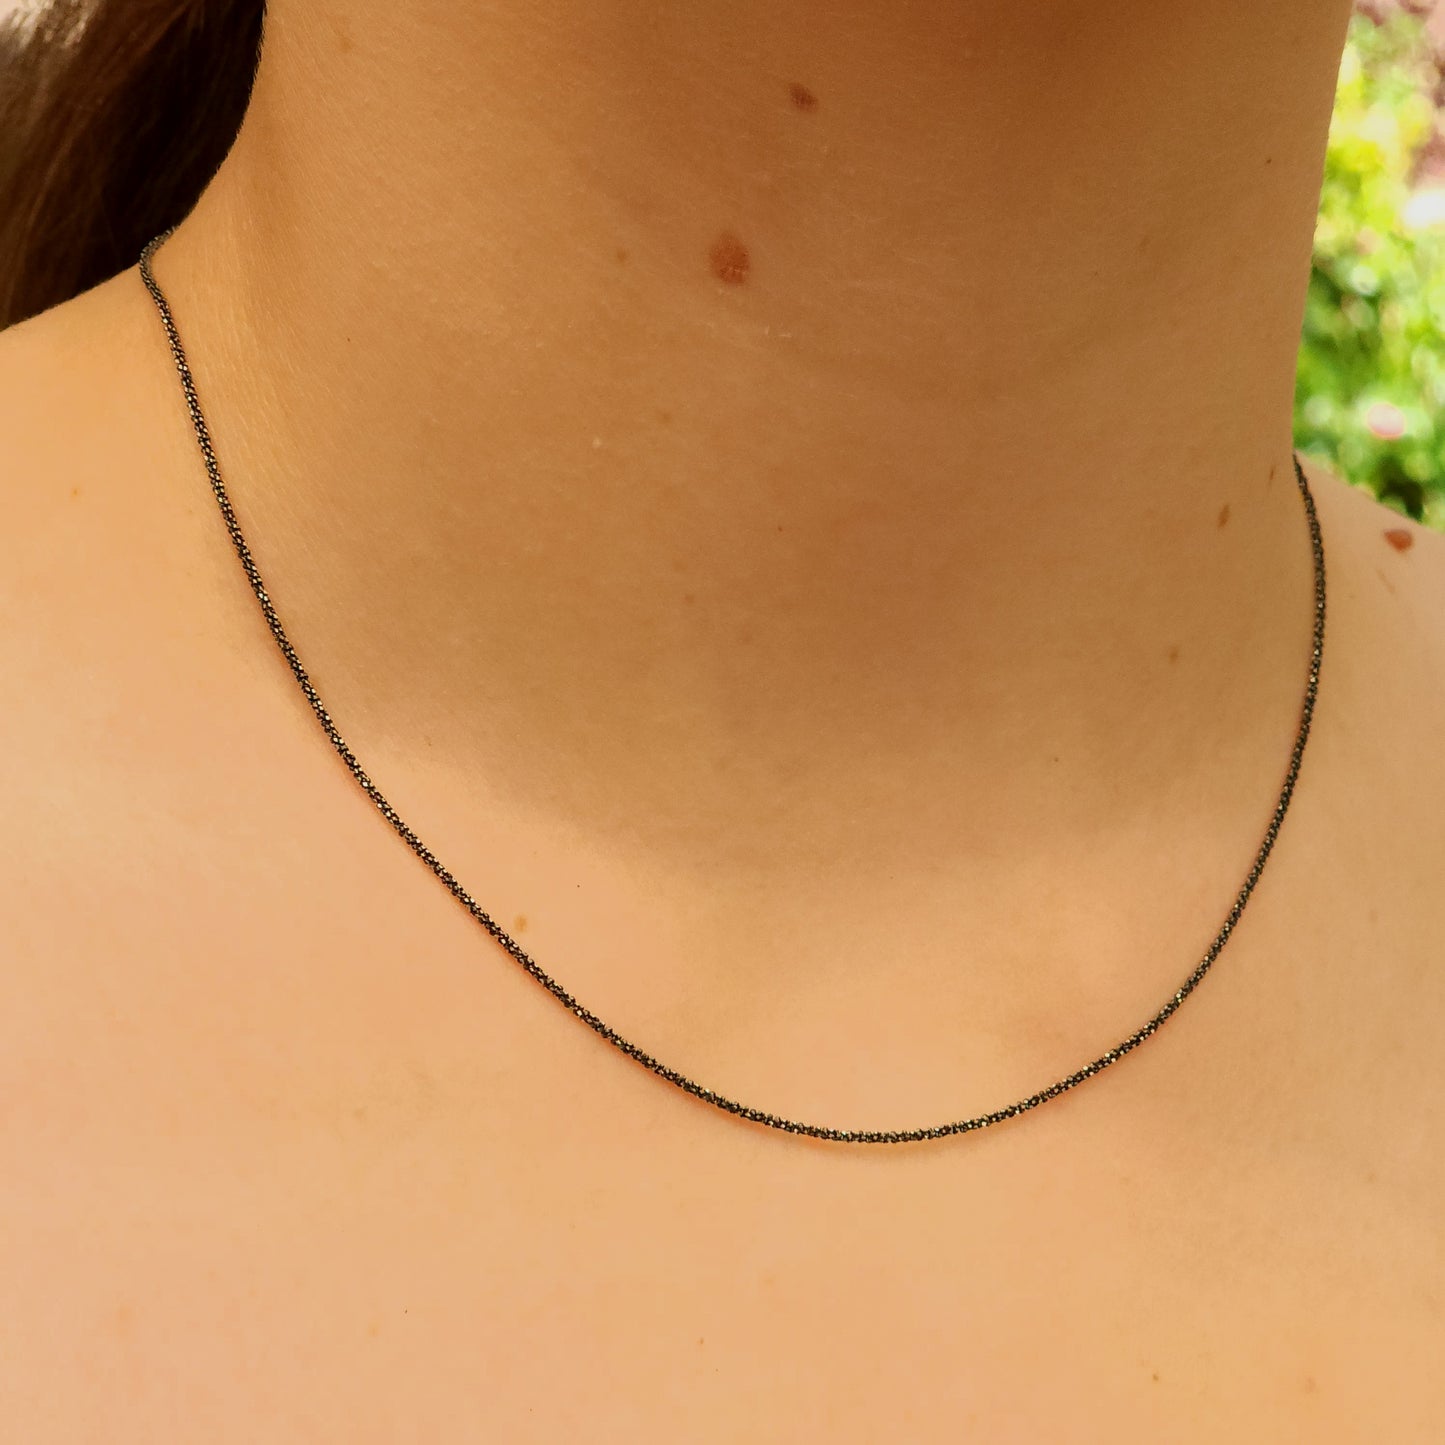 Ruthenium Plated Margo Silver Chain